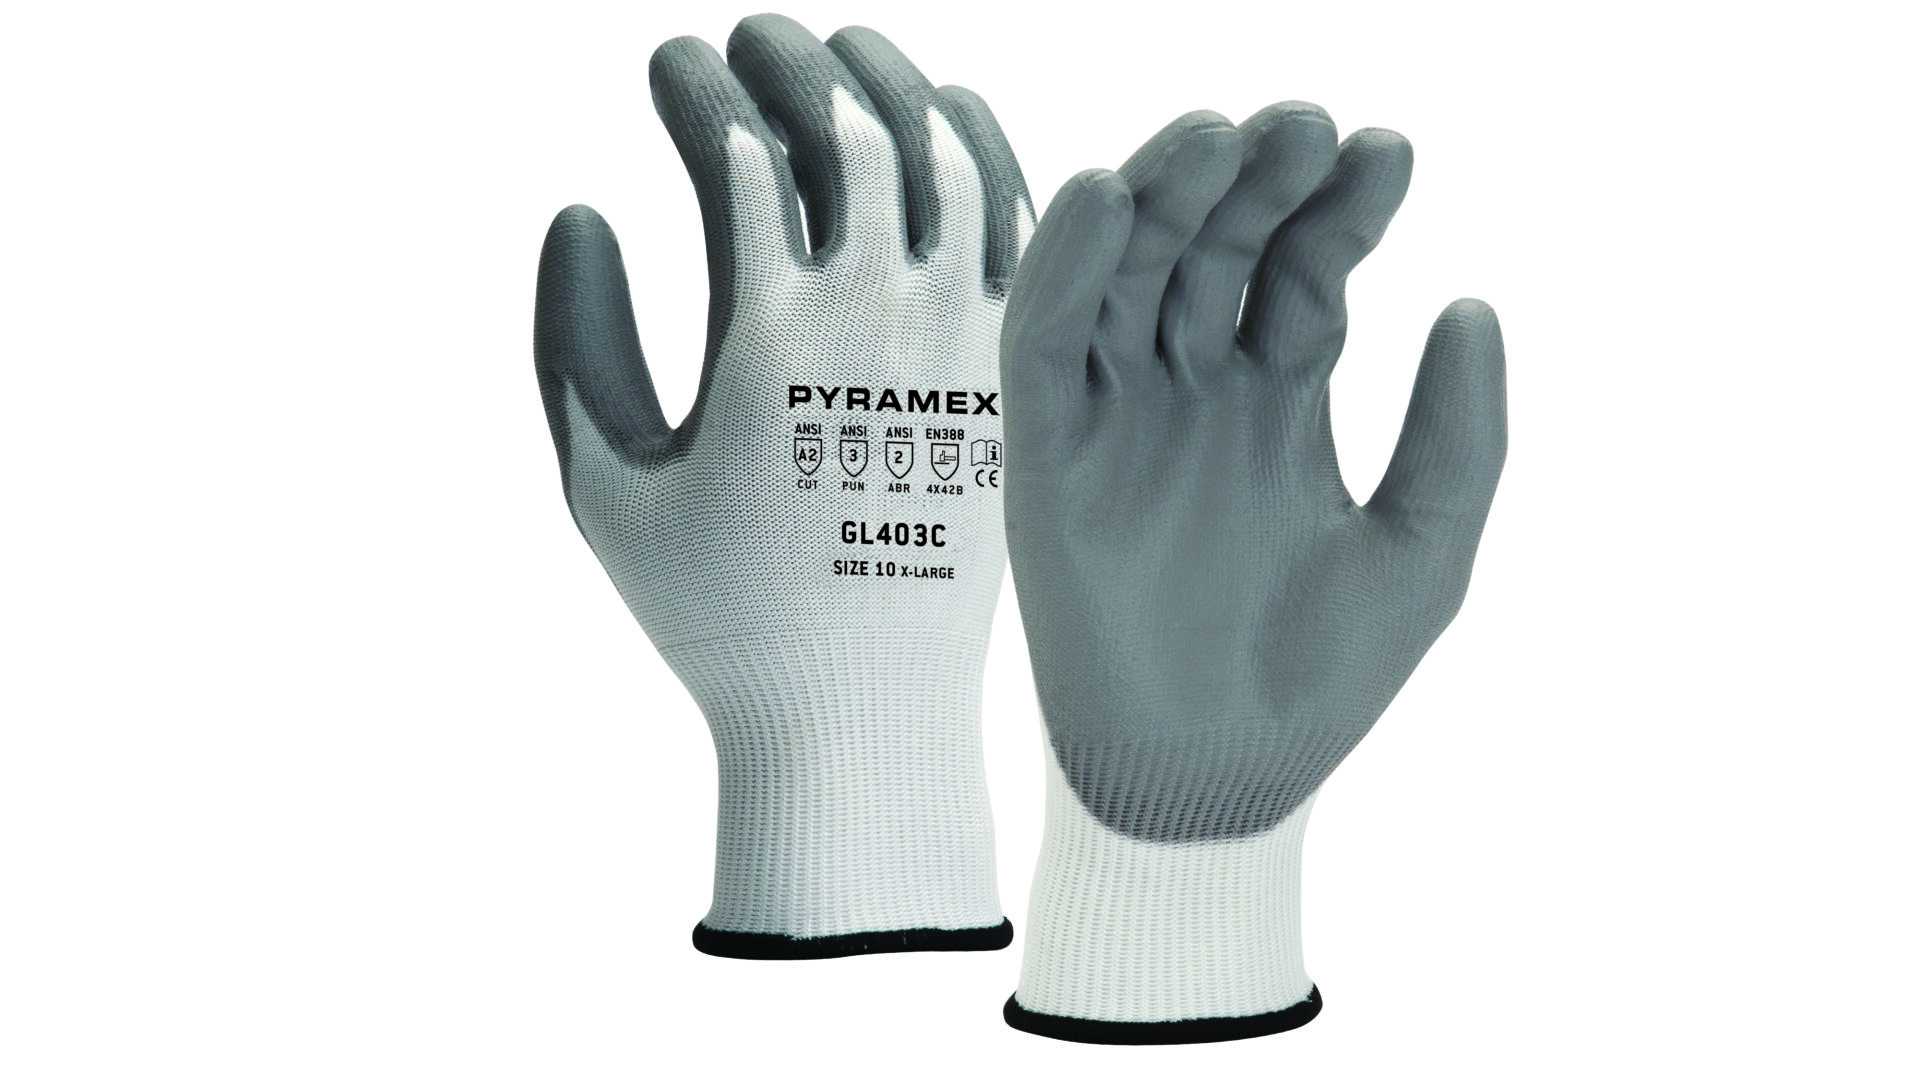 A White and Grey Color Gloves Pair Copy